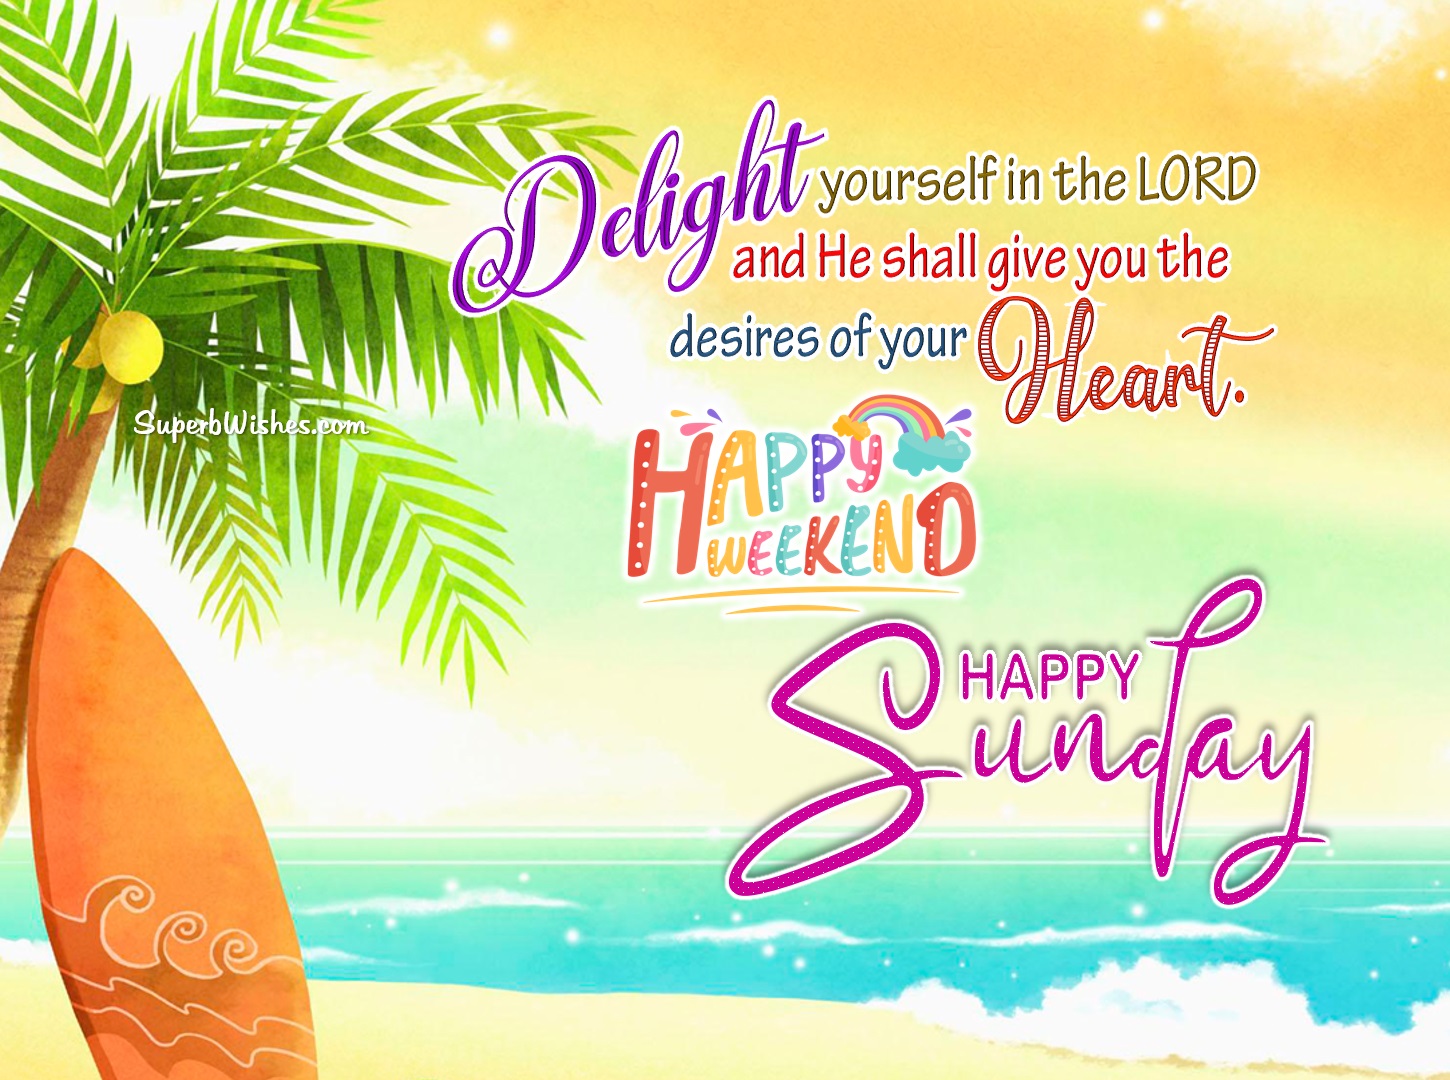 Happy Sunday Images - Delight Yourself In the LORD | SuperbWishes.com